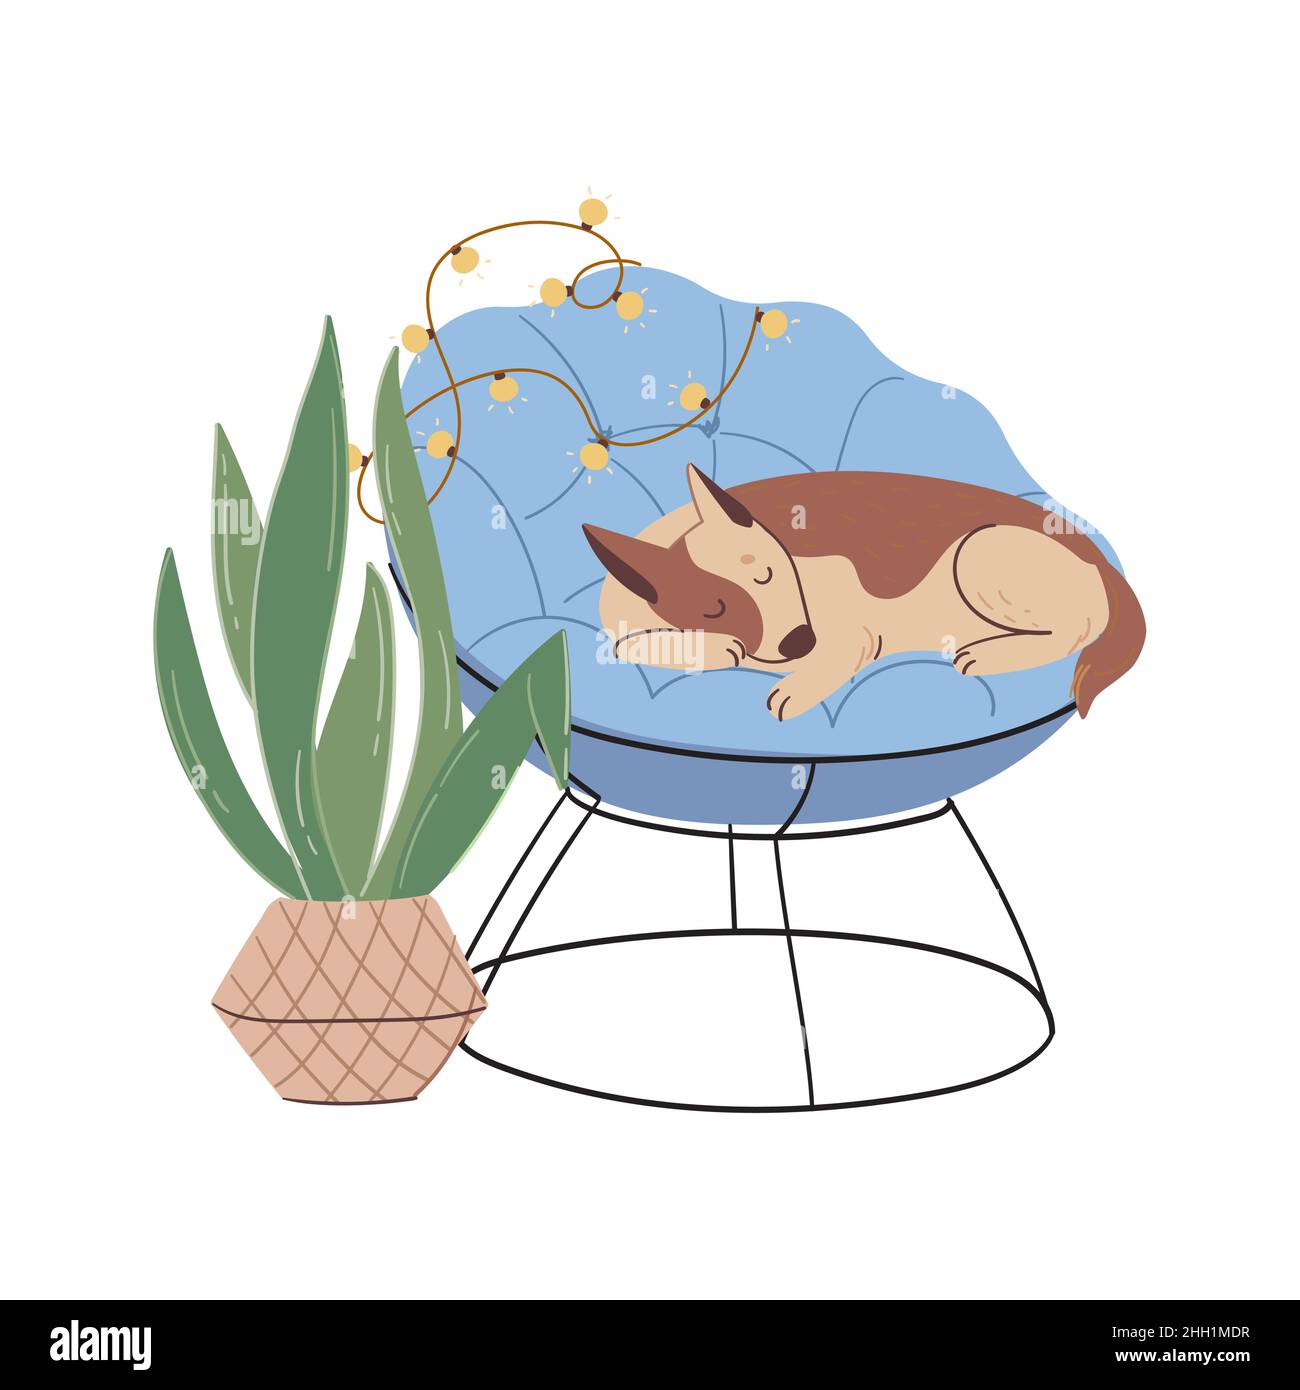 Sleeping dog in a chair. Illustration with an animal resting in an easy chair. Cozy vector composition in flat style Stock Vector